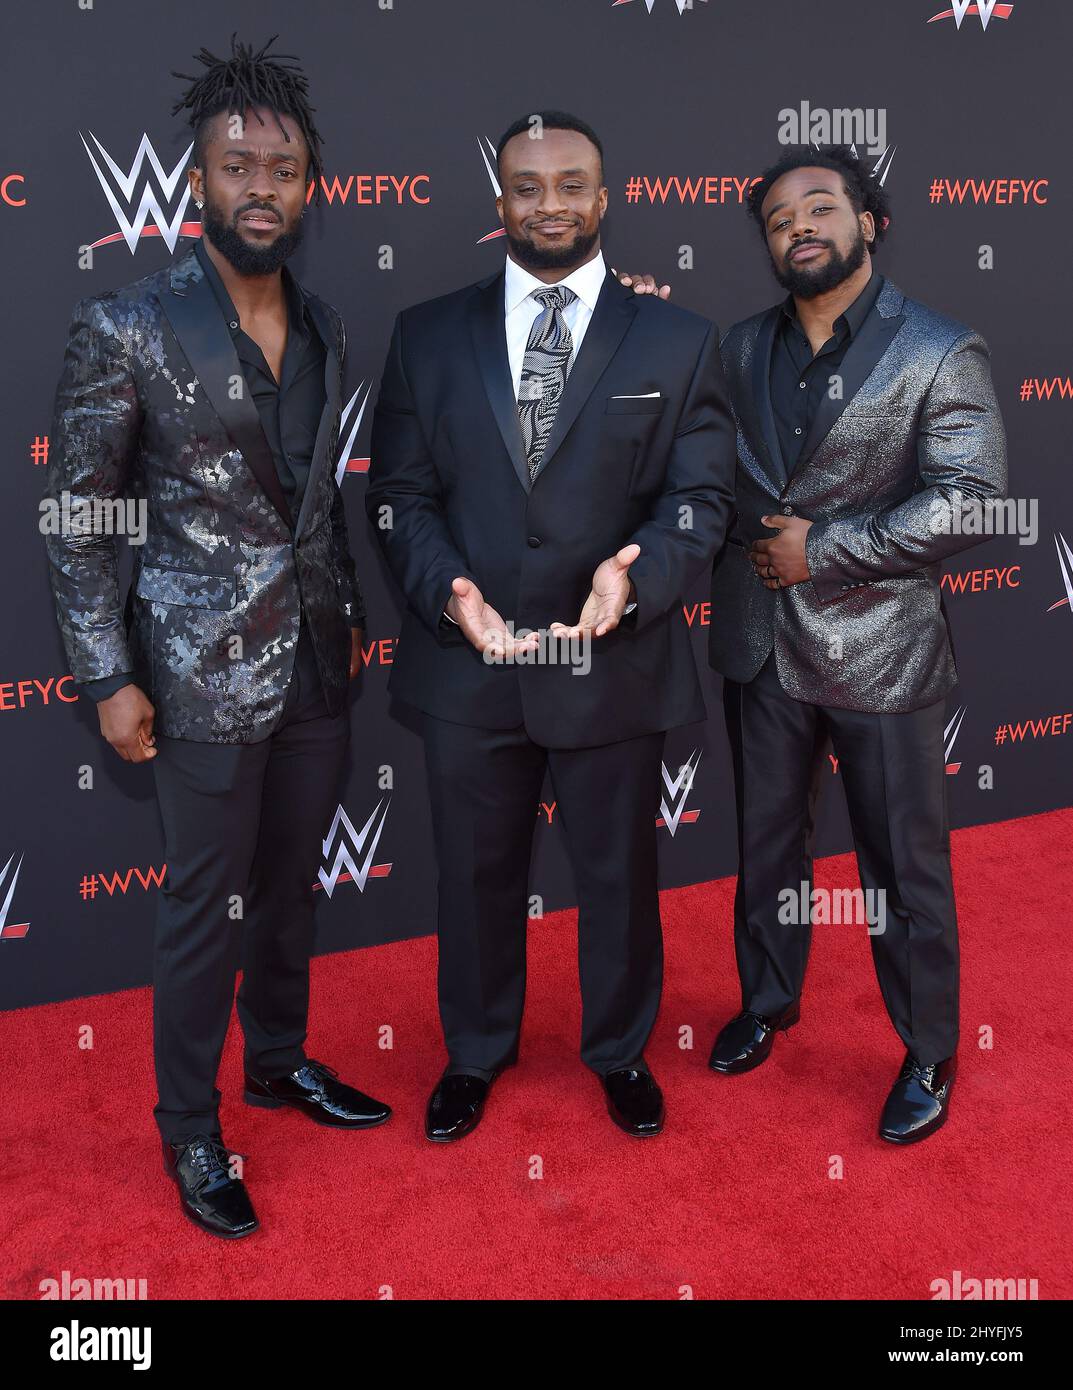 Xavier Woods, Big E and Kofi Kingston at the 'WWE' FYC Event event at TV Academy Saban Media Center on June 6, 2018 in North Hollywood, CA. Stock Photo